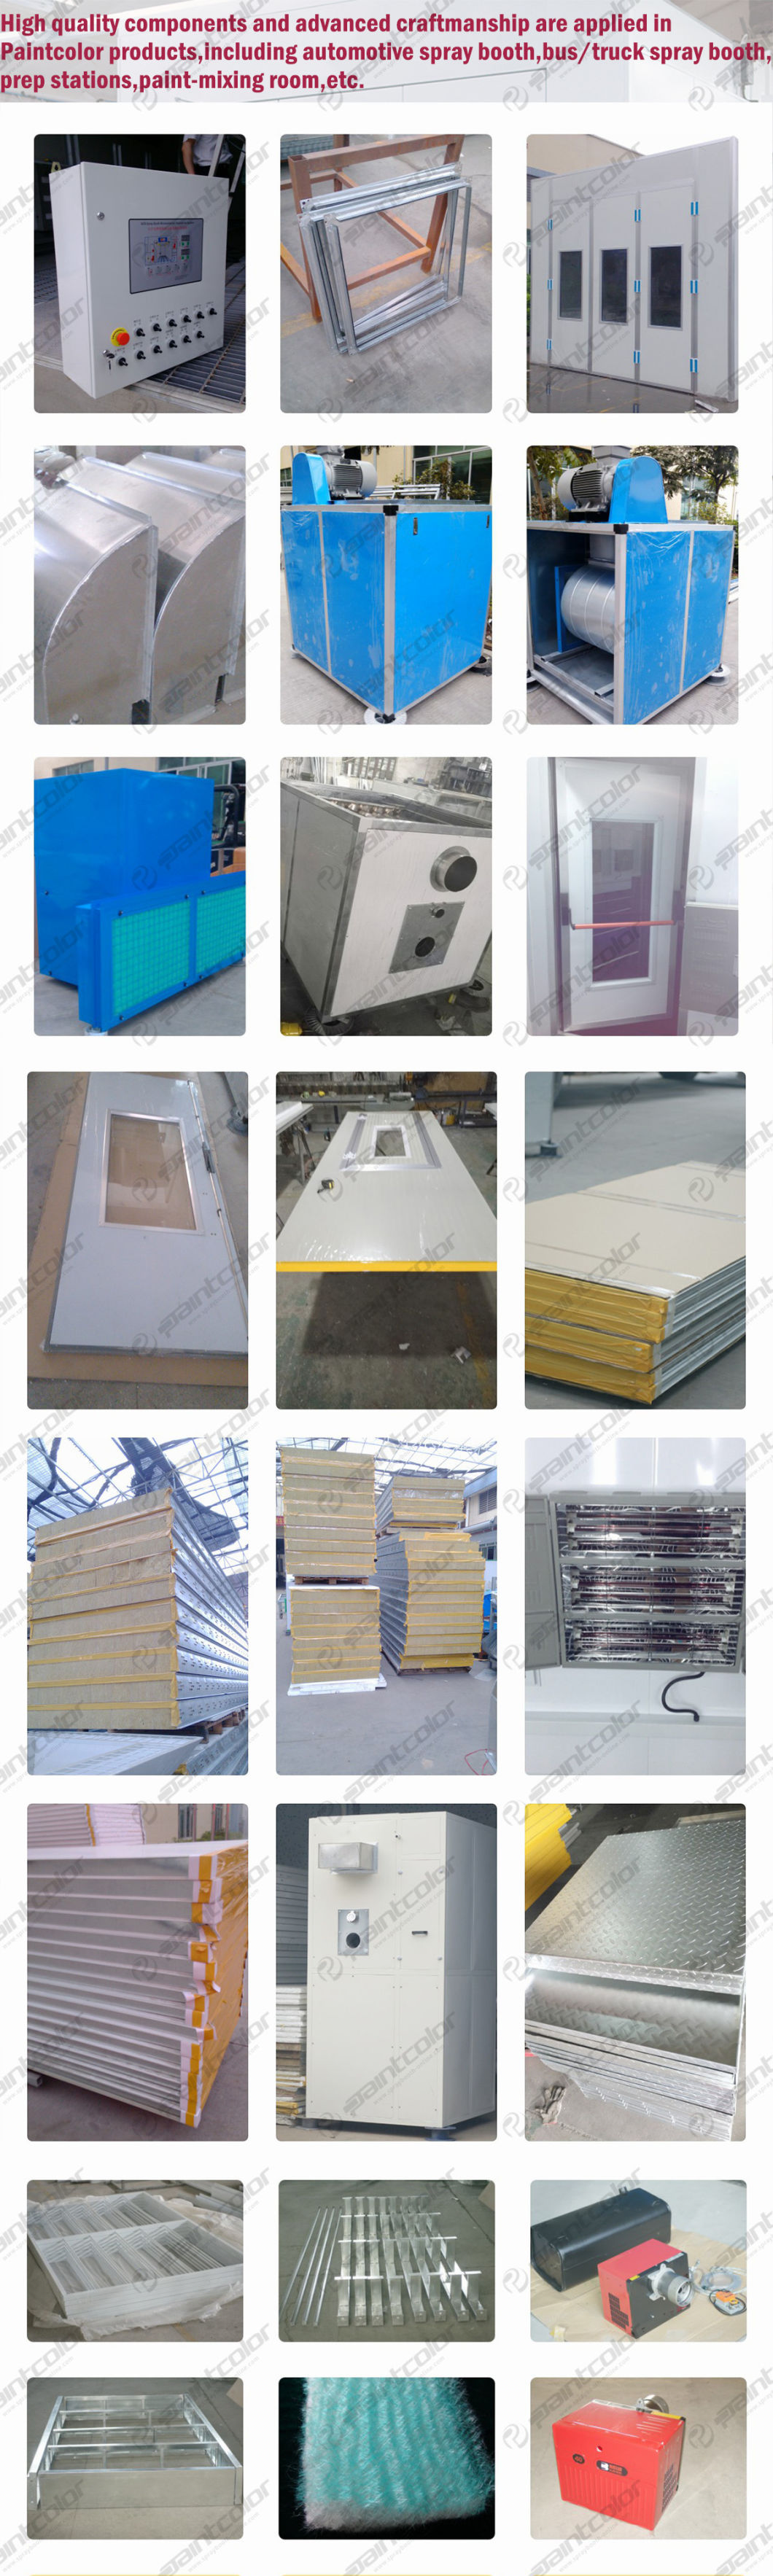 Air Heating Units in Refinish Spray Booths with Heat Recovery System Paintcolor Brand